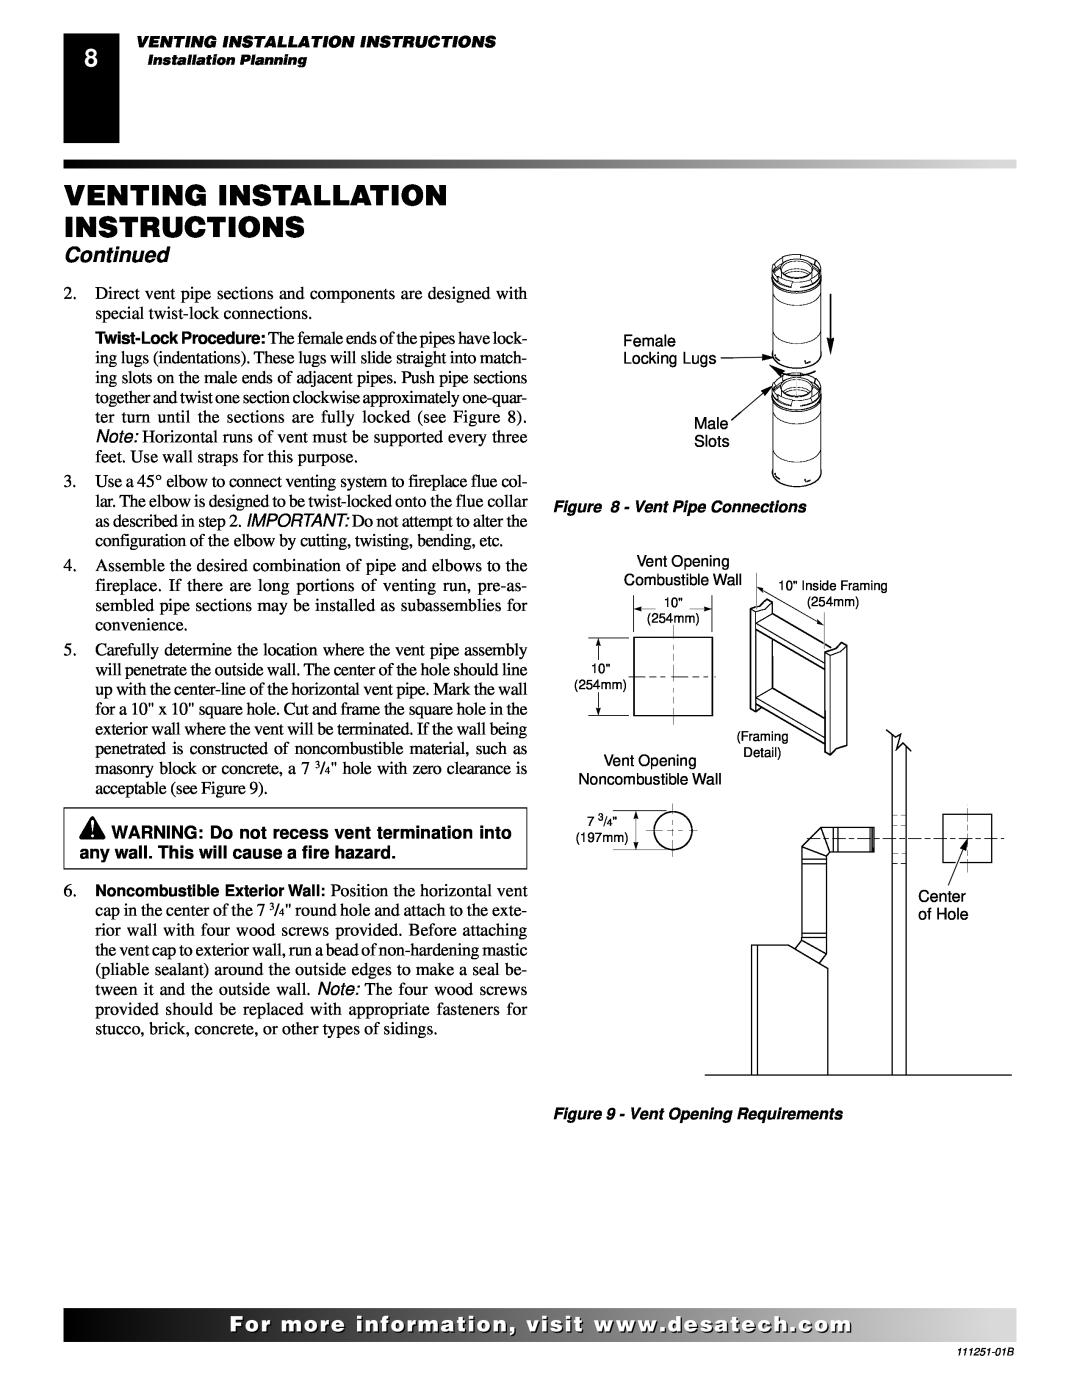 Desa (V)T36ENA Venting Installation Instructions, Continued, Female Locking Lugs Male Slots, Vent Pipe Connections, Center 